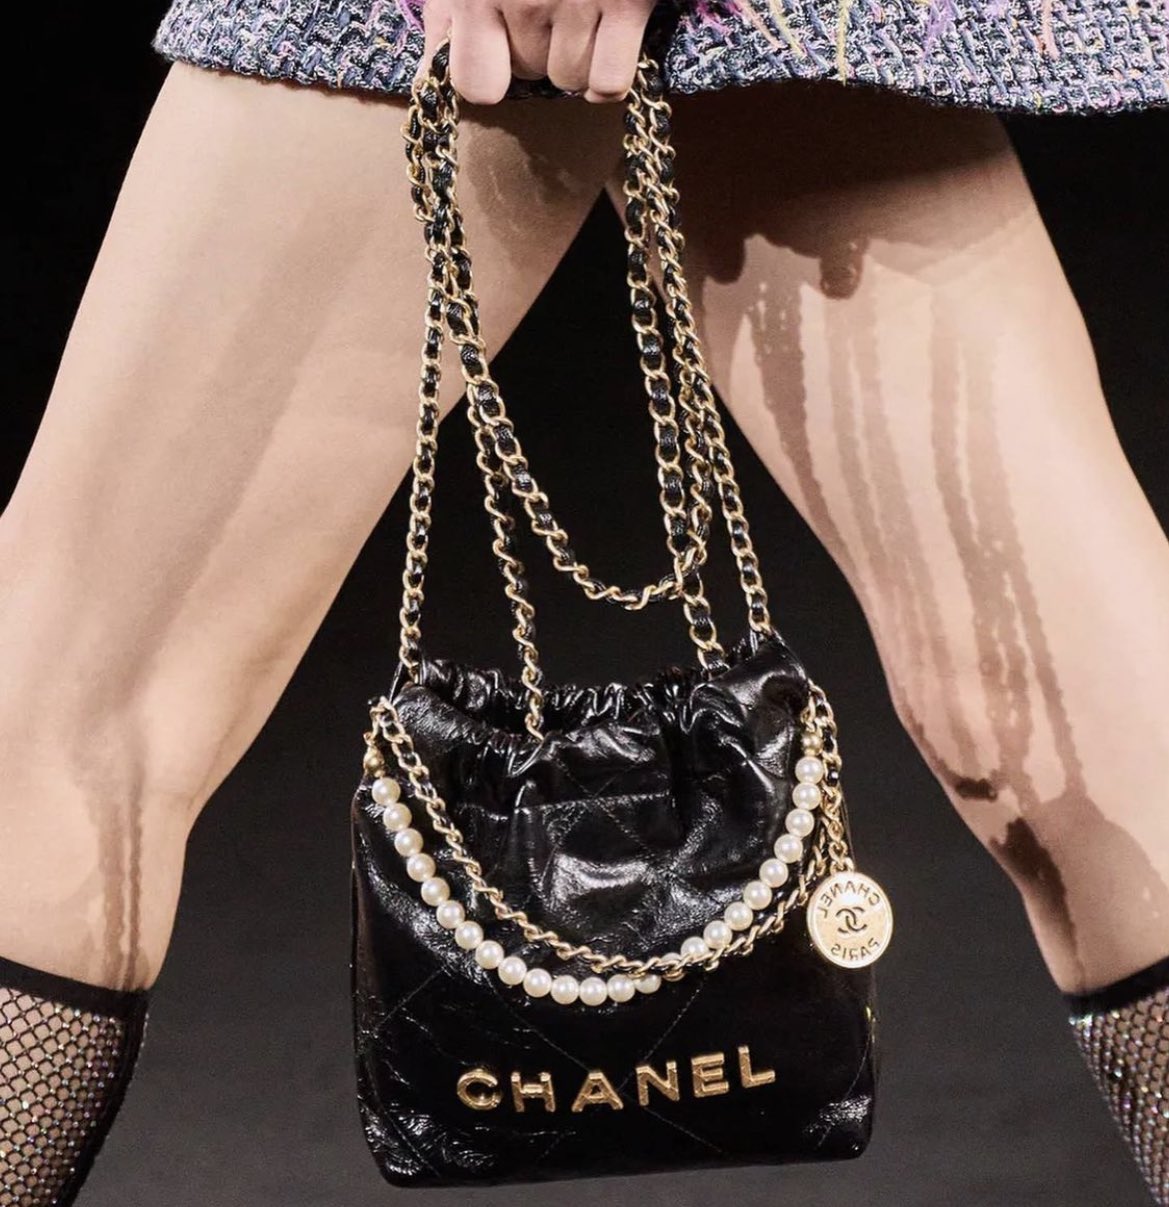 Chanel No.1 Fan Page (@chanelinternational) • Instagram photos and videos